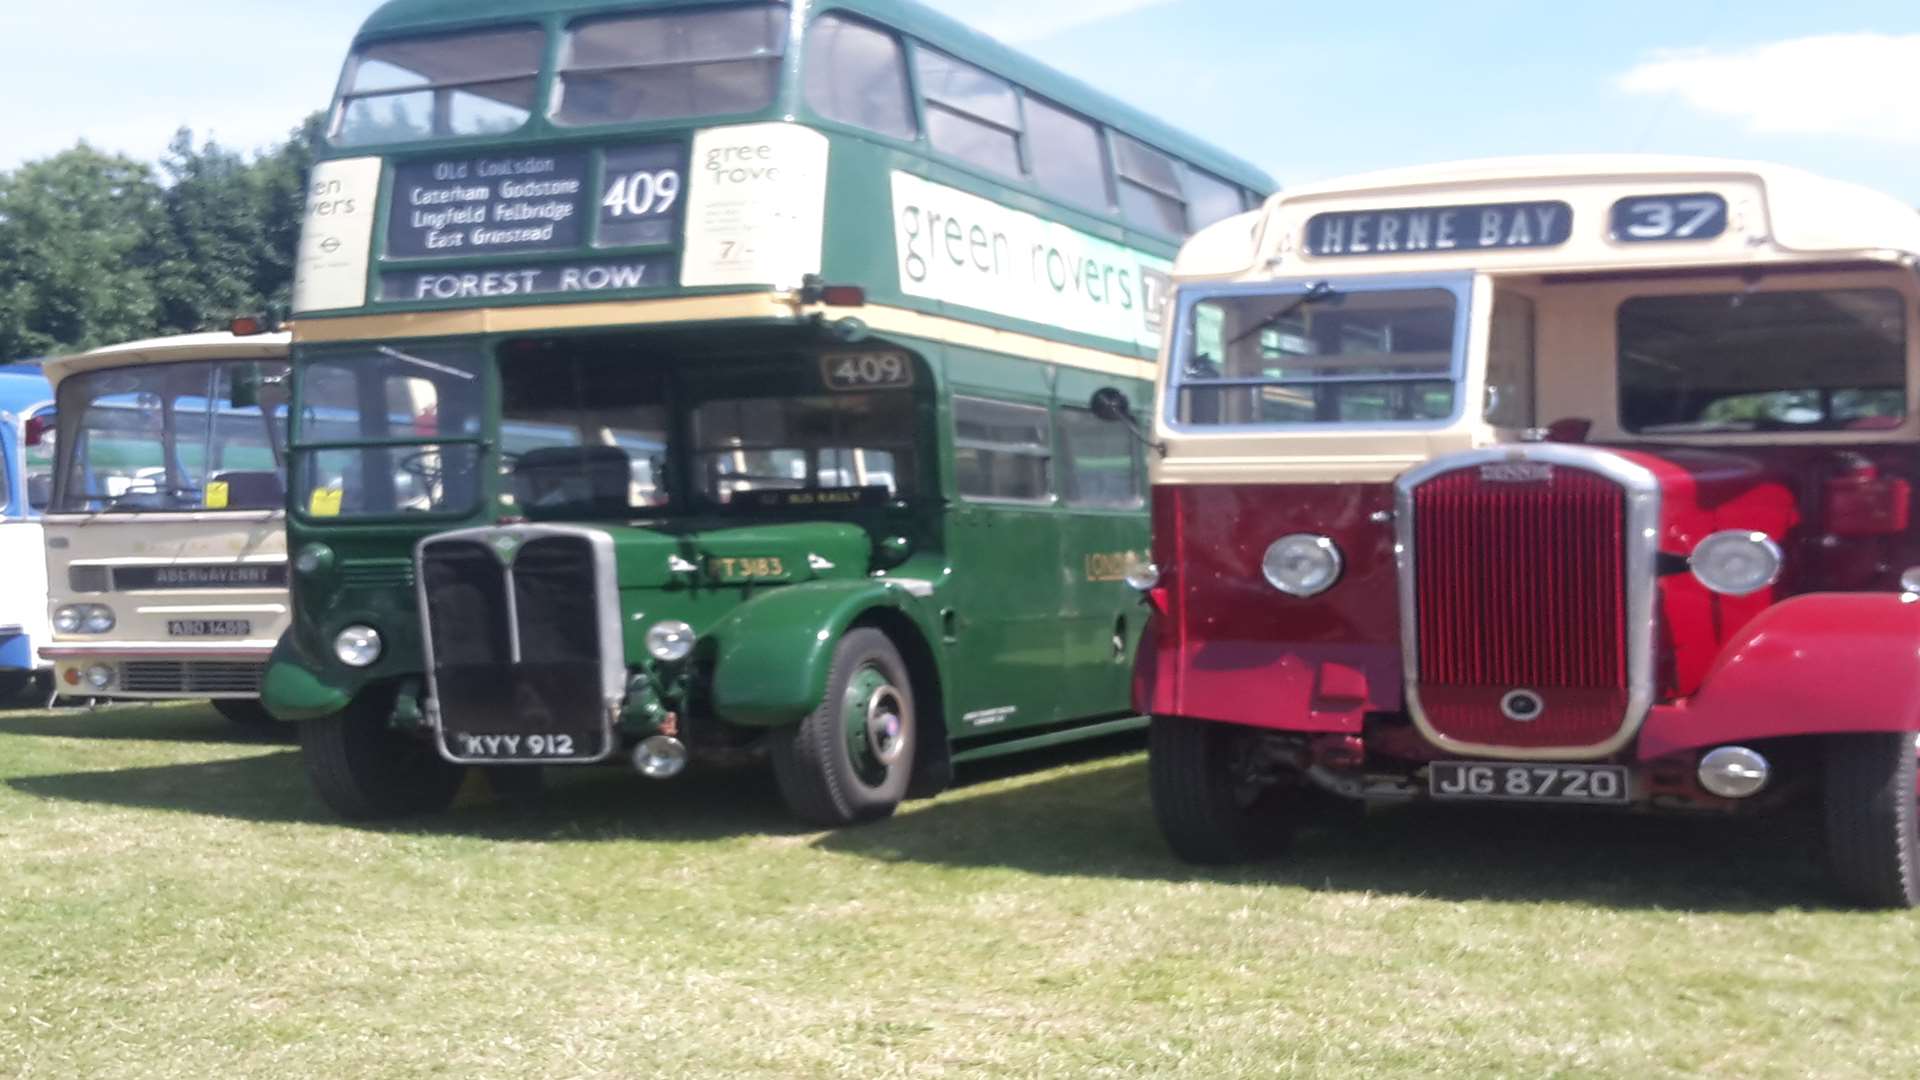 Vintage buses play a key part in the show